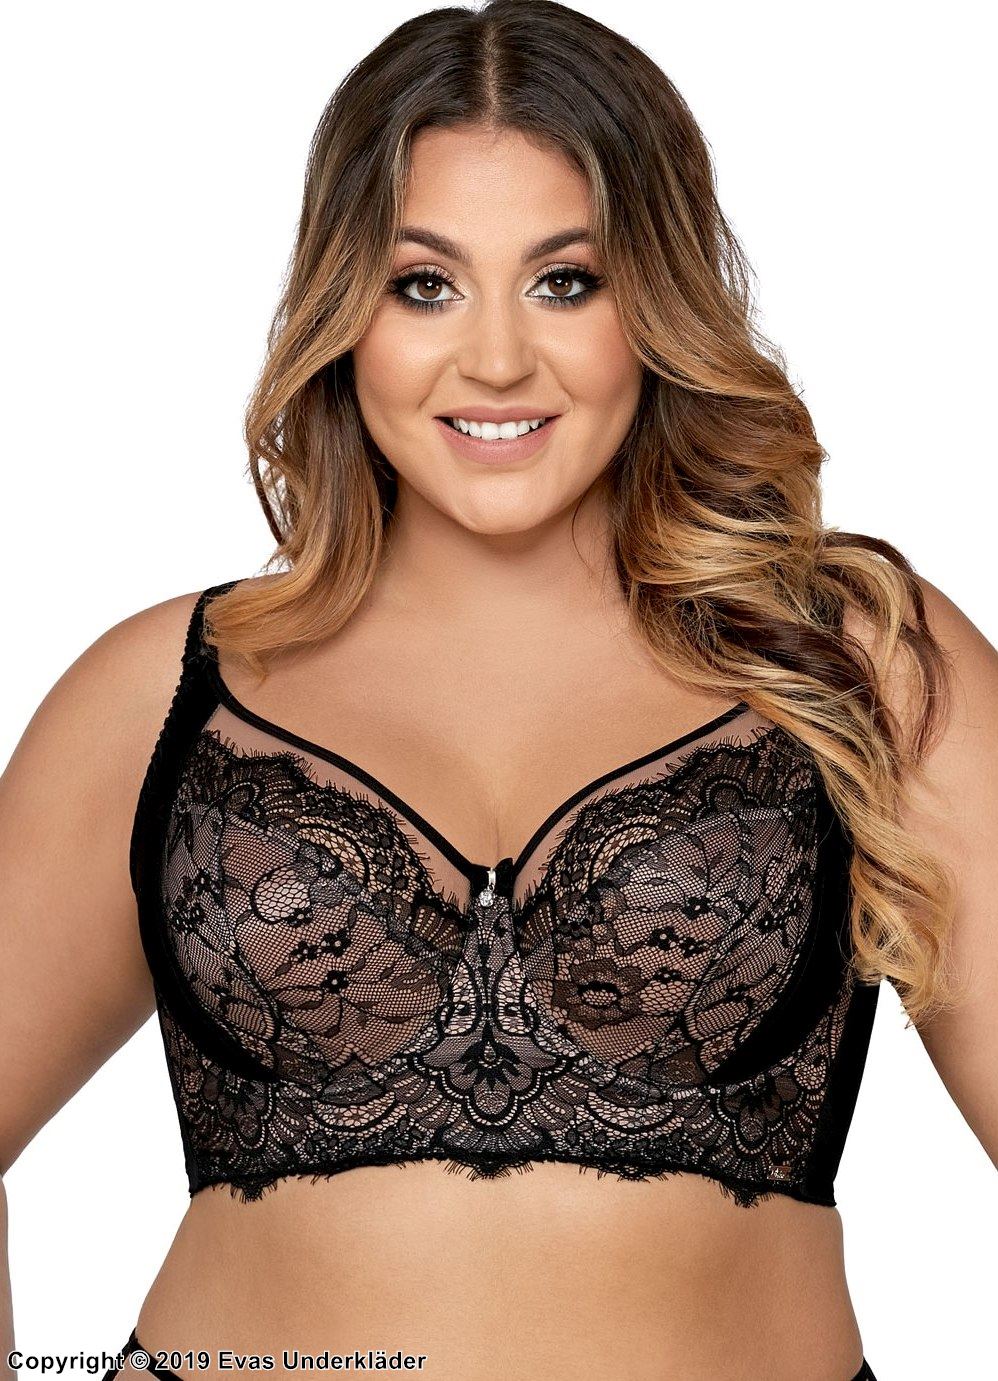 Soft longline bra, lace overlay, straps over bust, B to J-cup